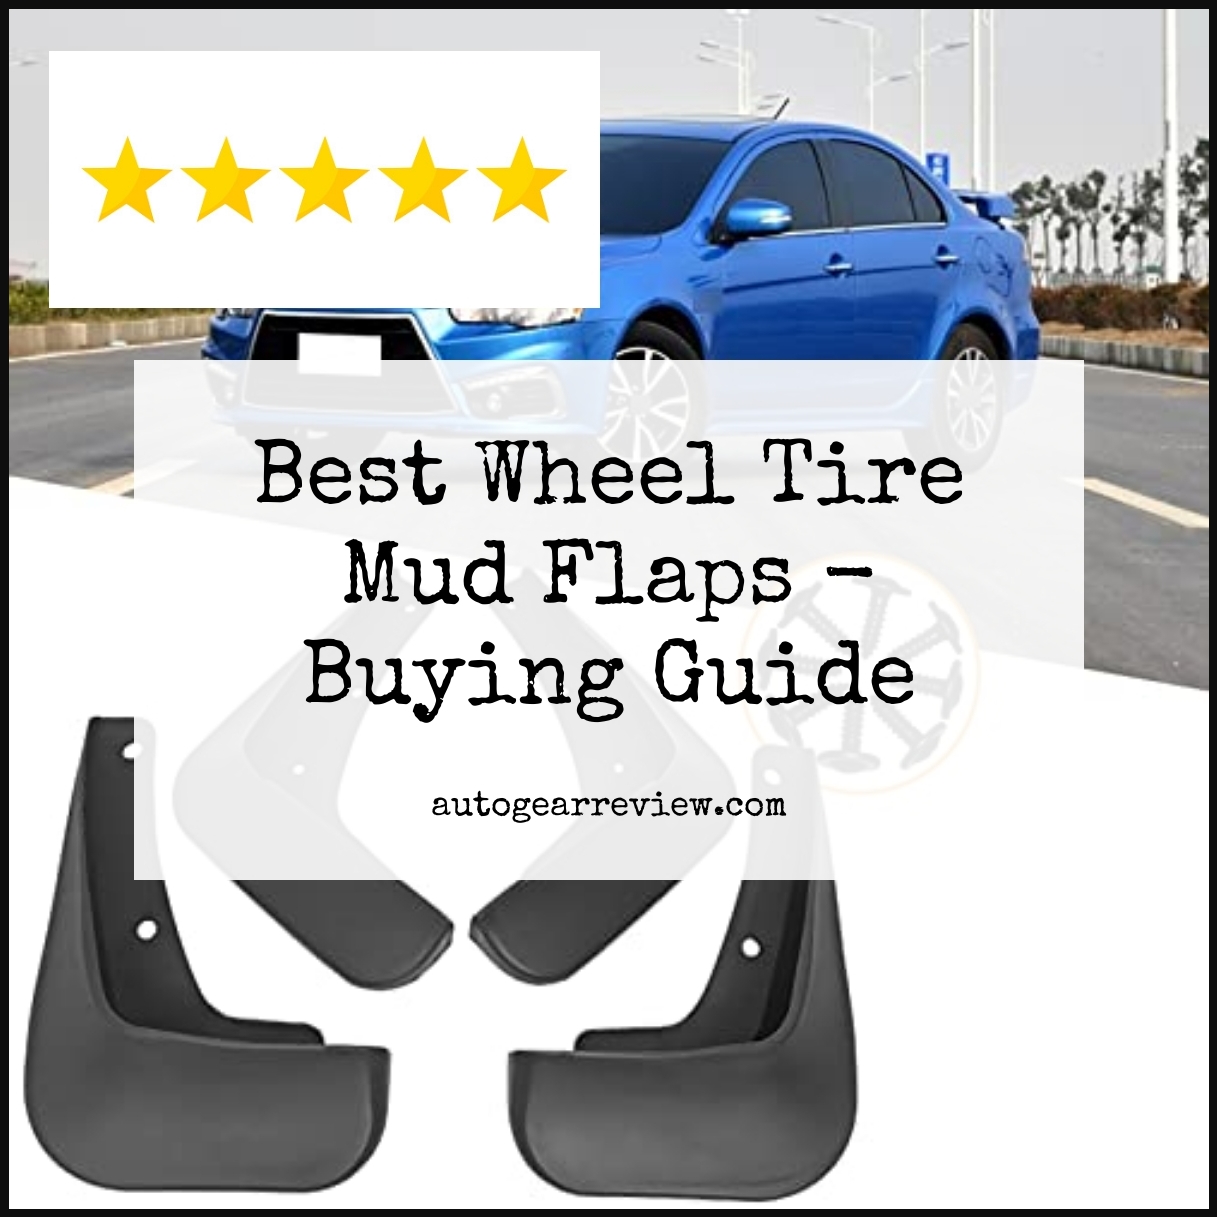 Best Wheel Tire Mud Flaps - Buying Guide